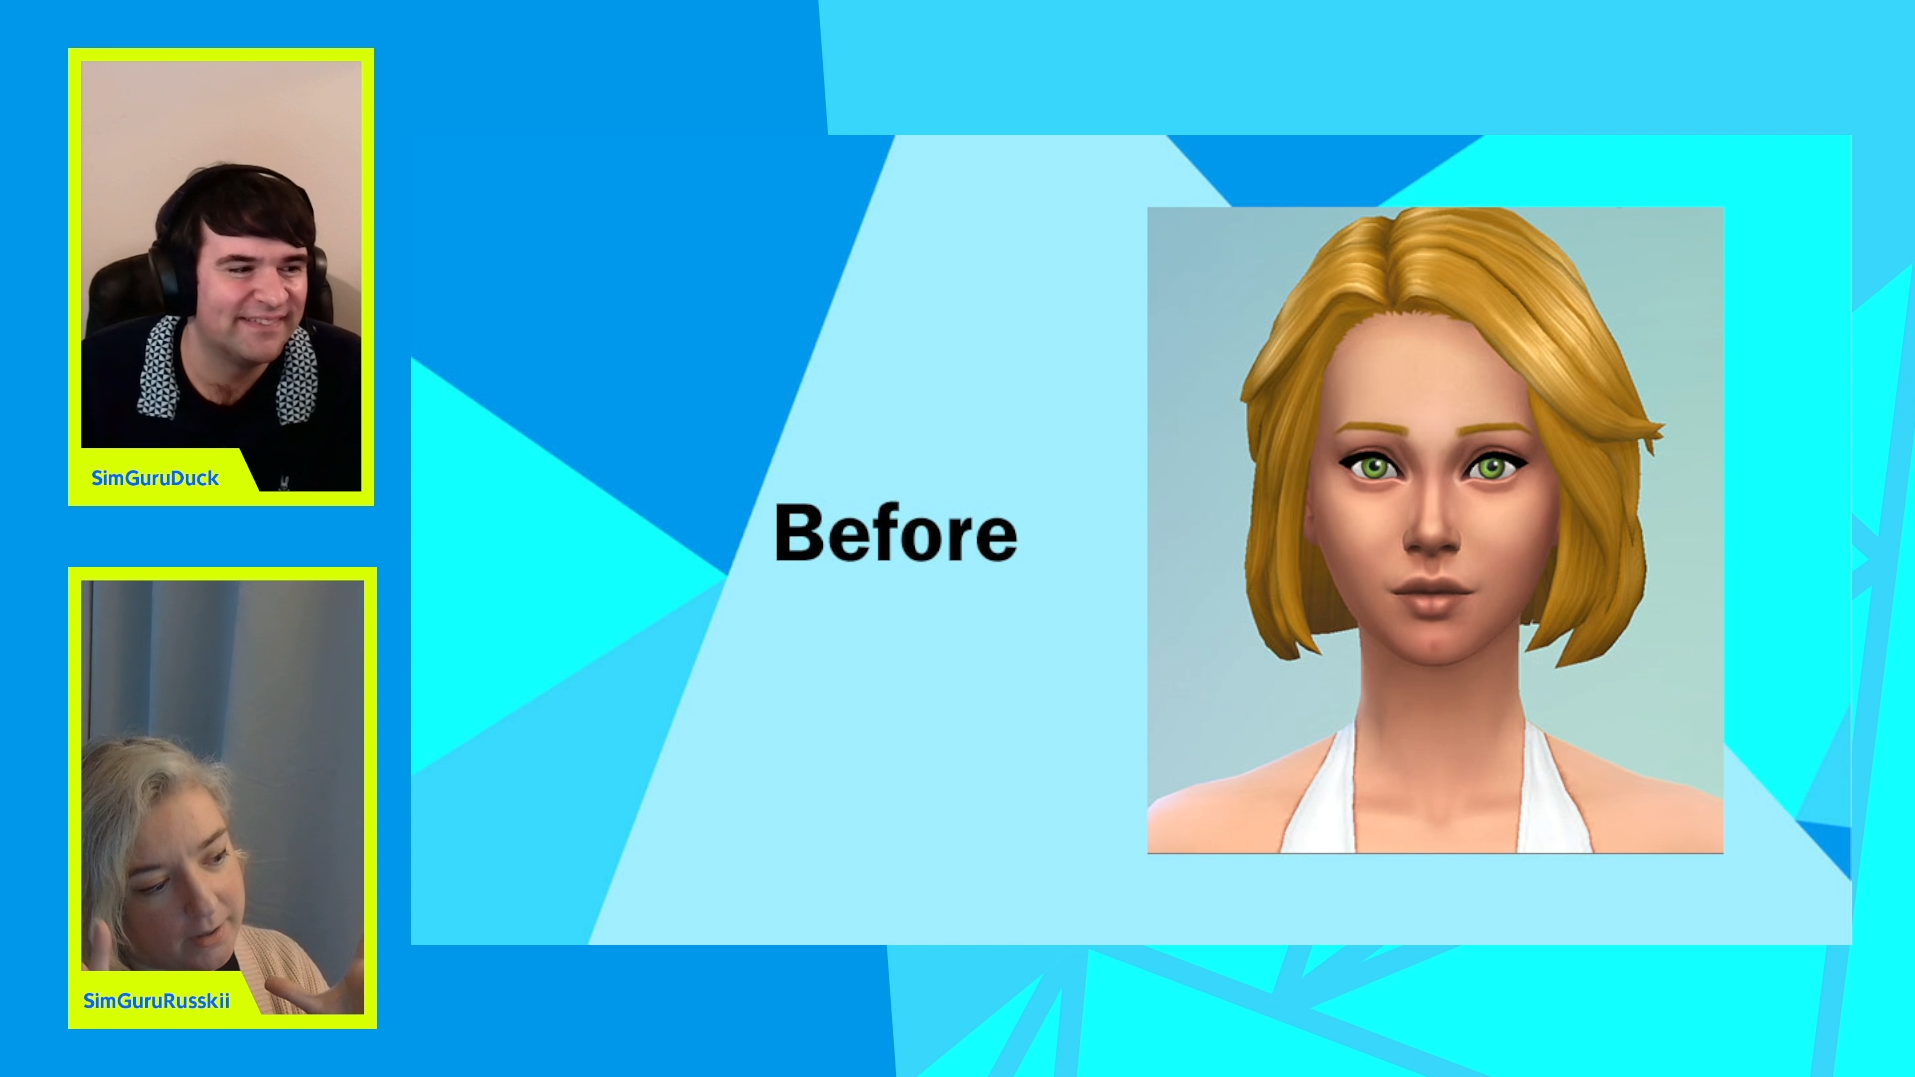 The Sims 4: First Look at the NPC Overhaul | SimsVIP